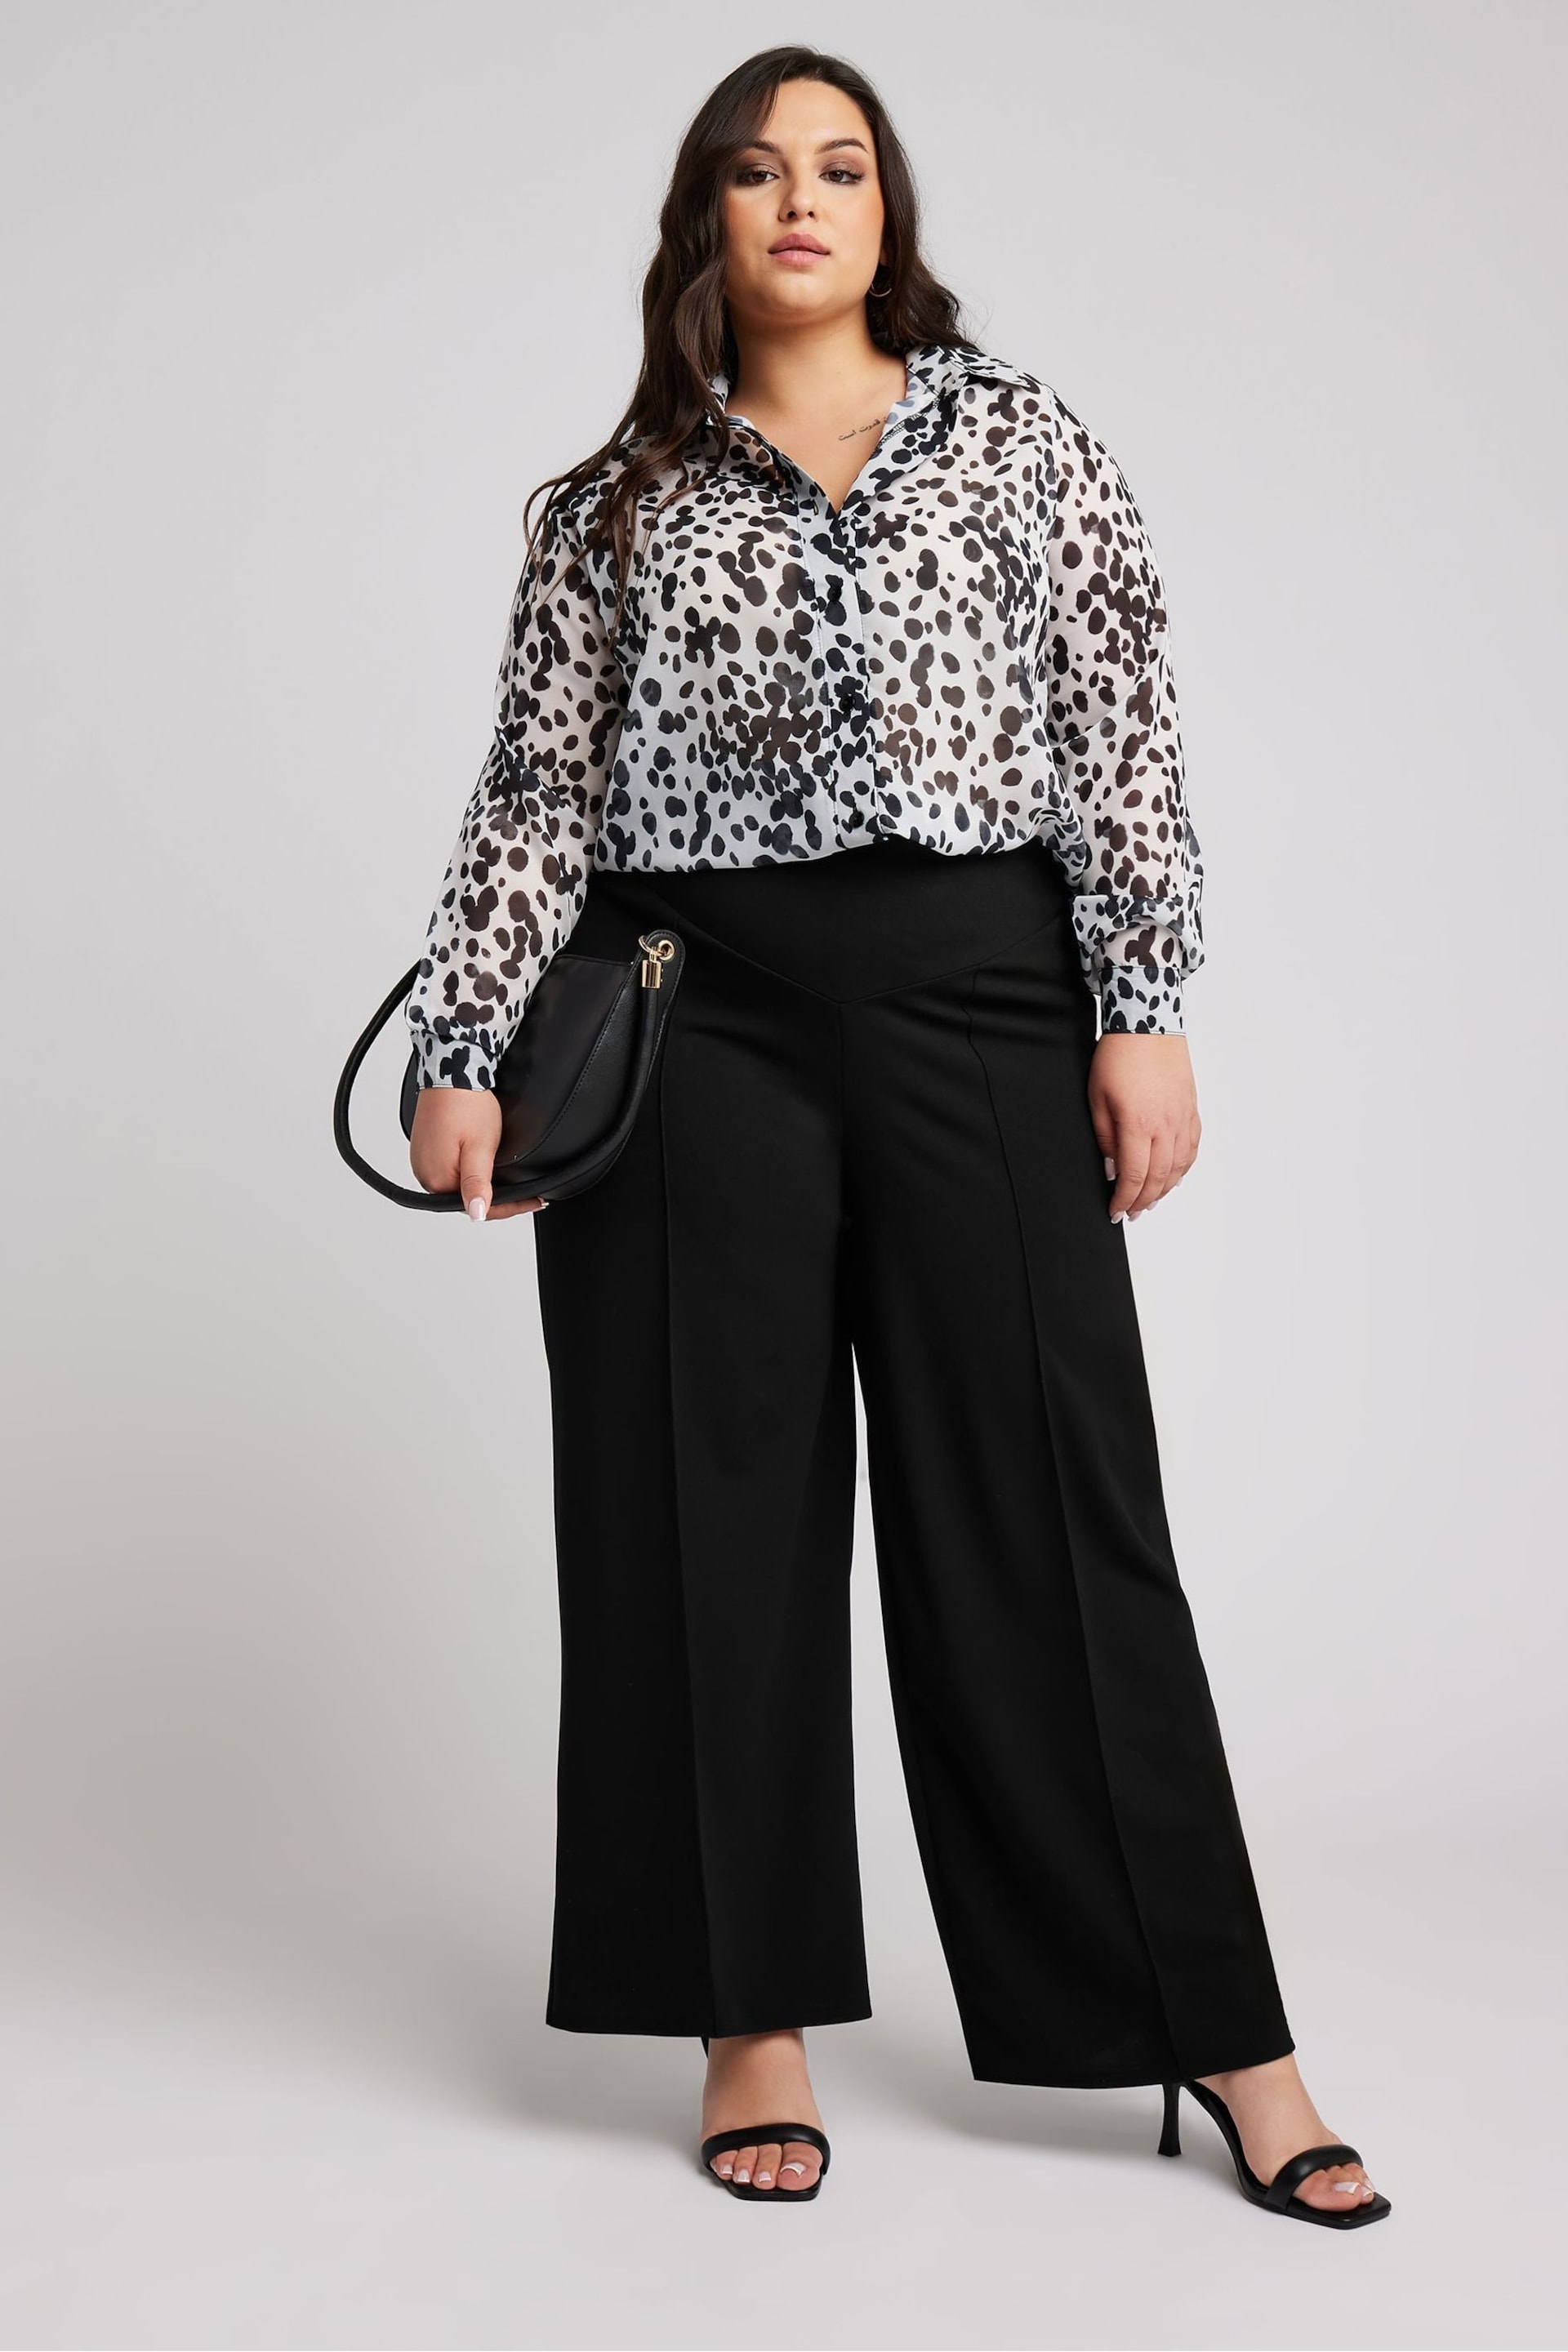 Yours Curve Black Panelled Trousers - Image 1 of 5